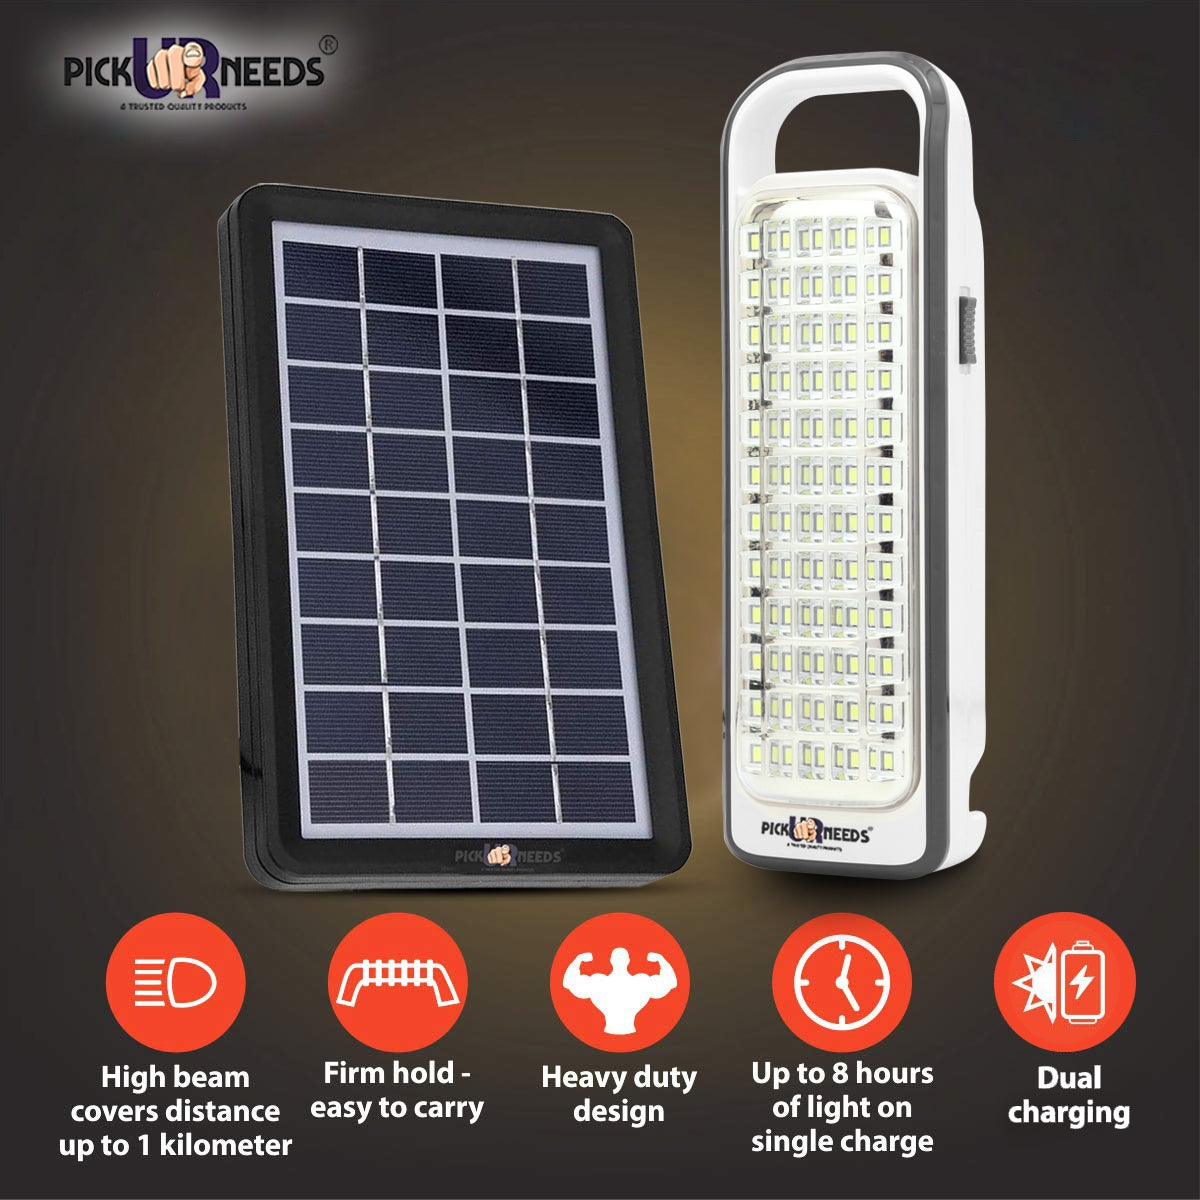 Pick Ur Needs Portable & Solar Rechargeable Lantern Home Emergency Light Built-in 60-LED Bulbs with Solar Panel(3W+9V)